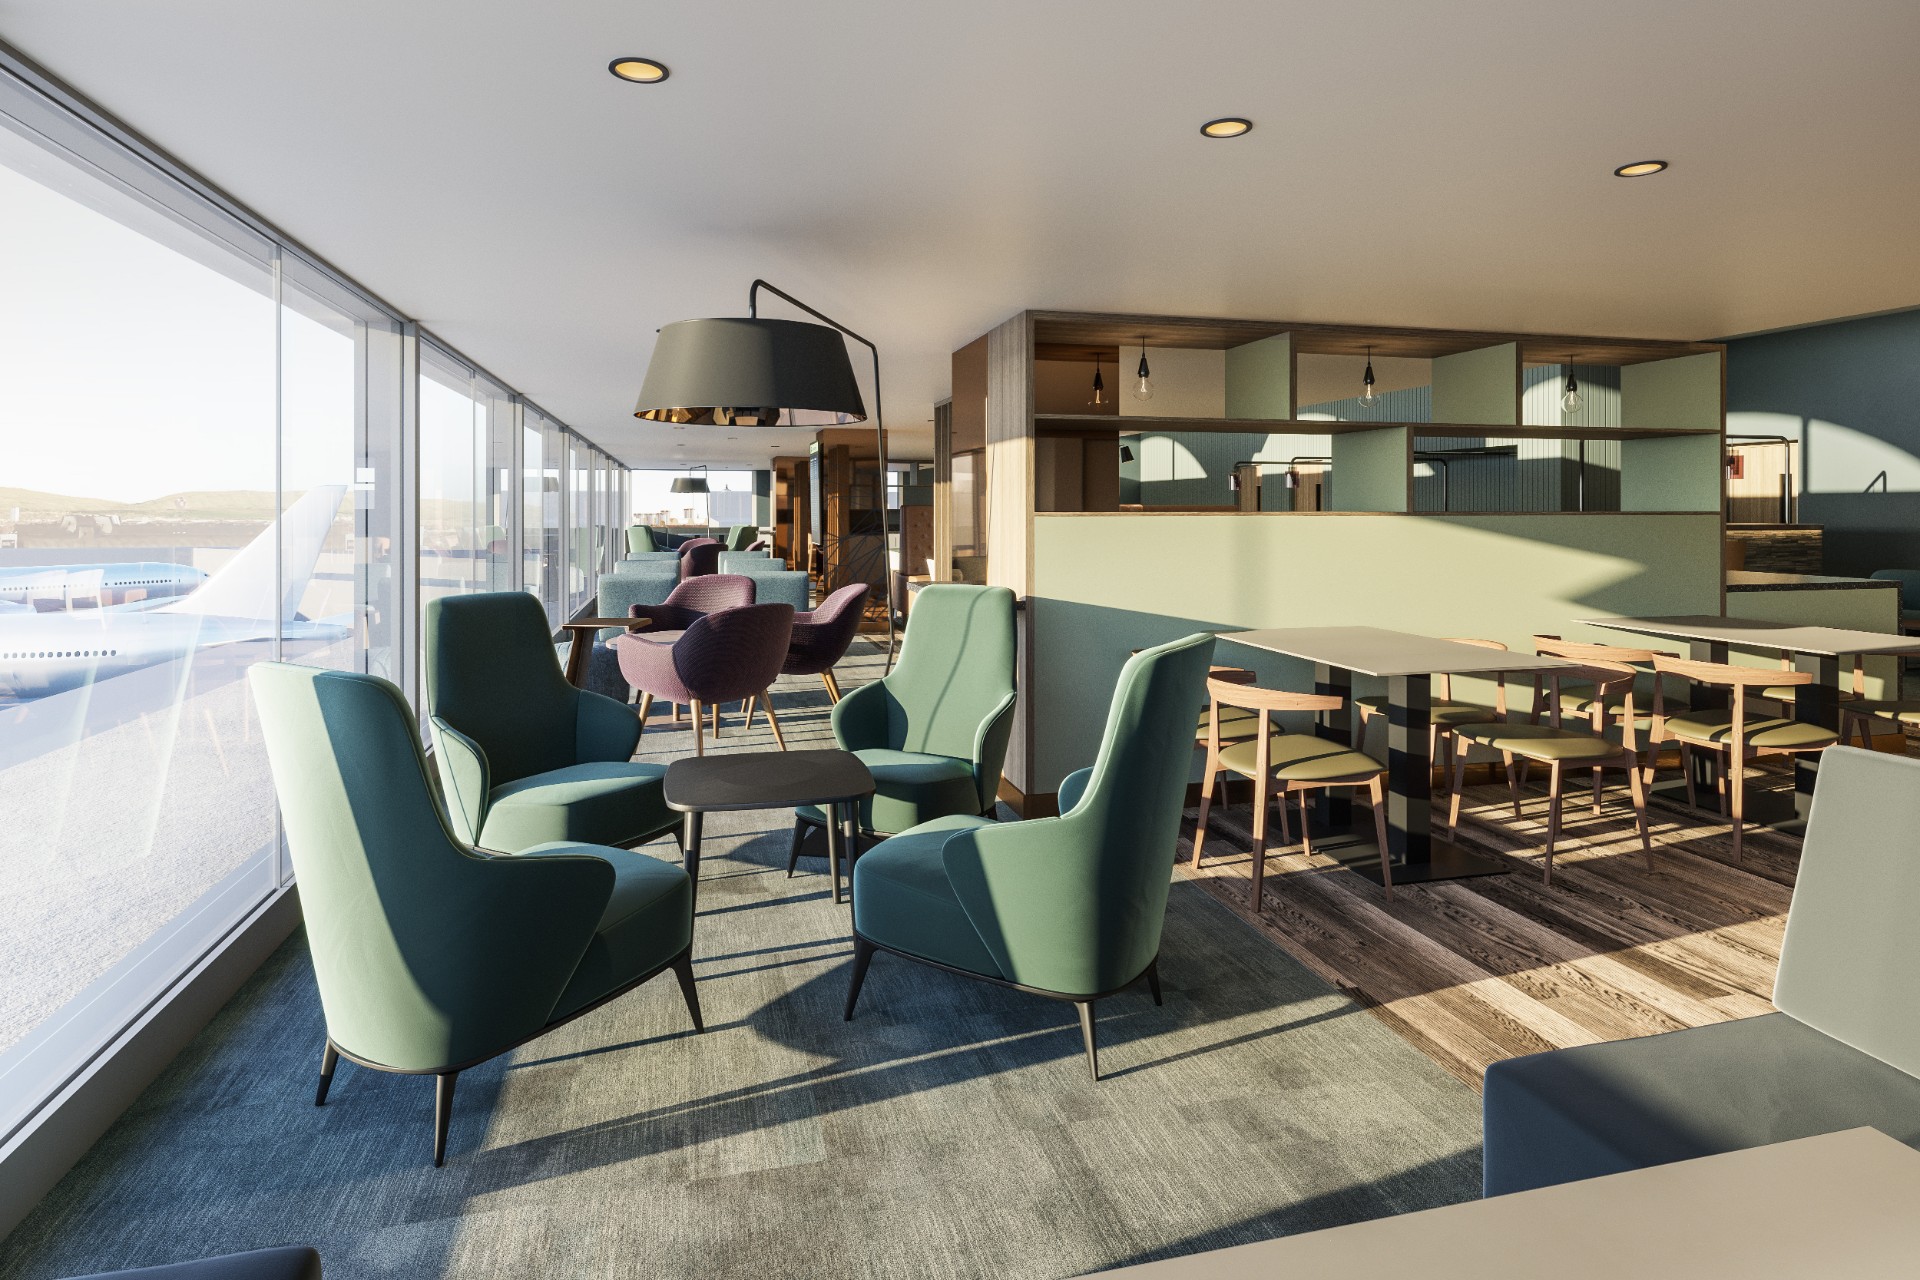 How the new Lomond Lounge at Glasgow Airport will look when completed